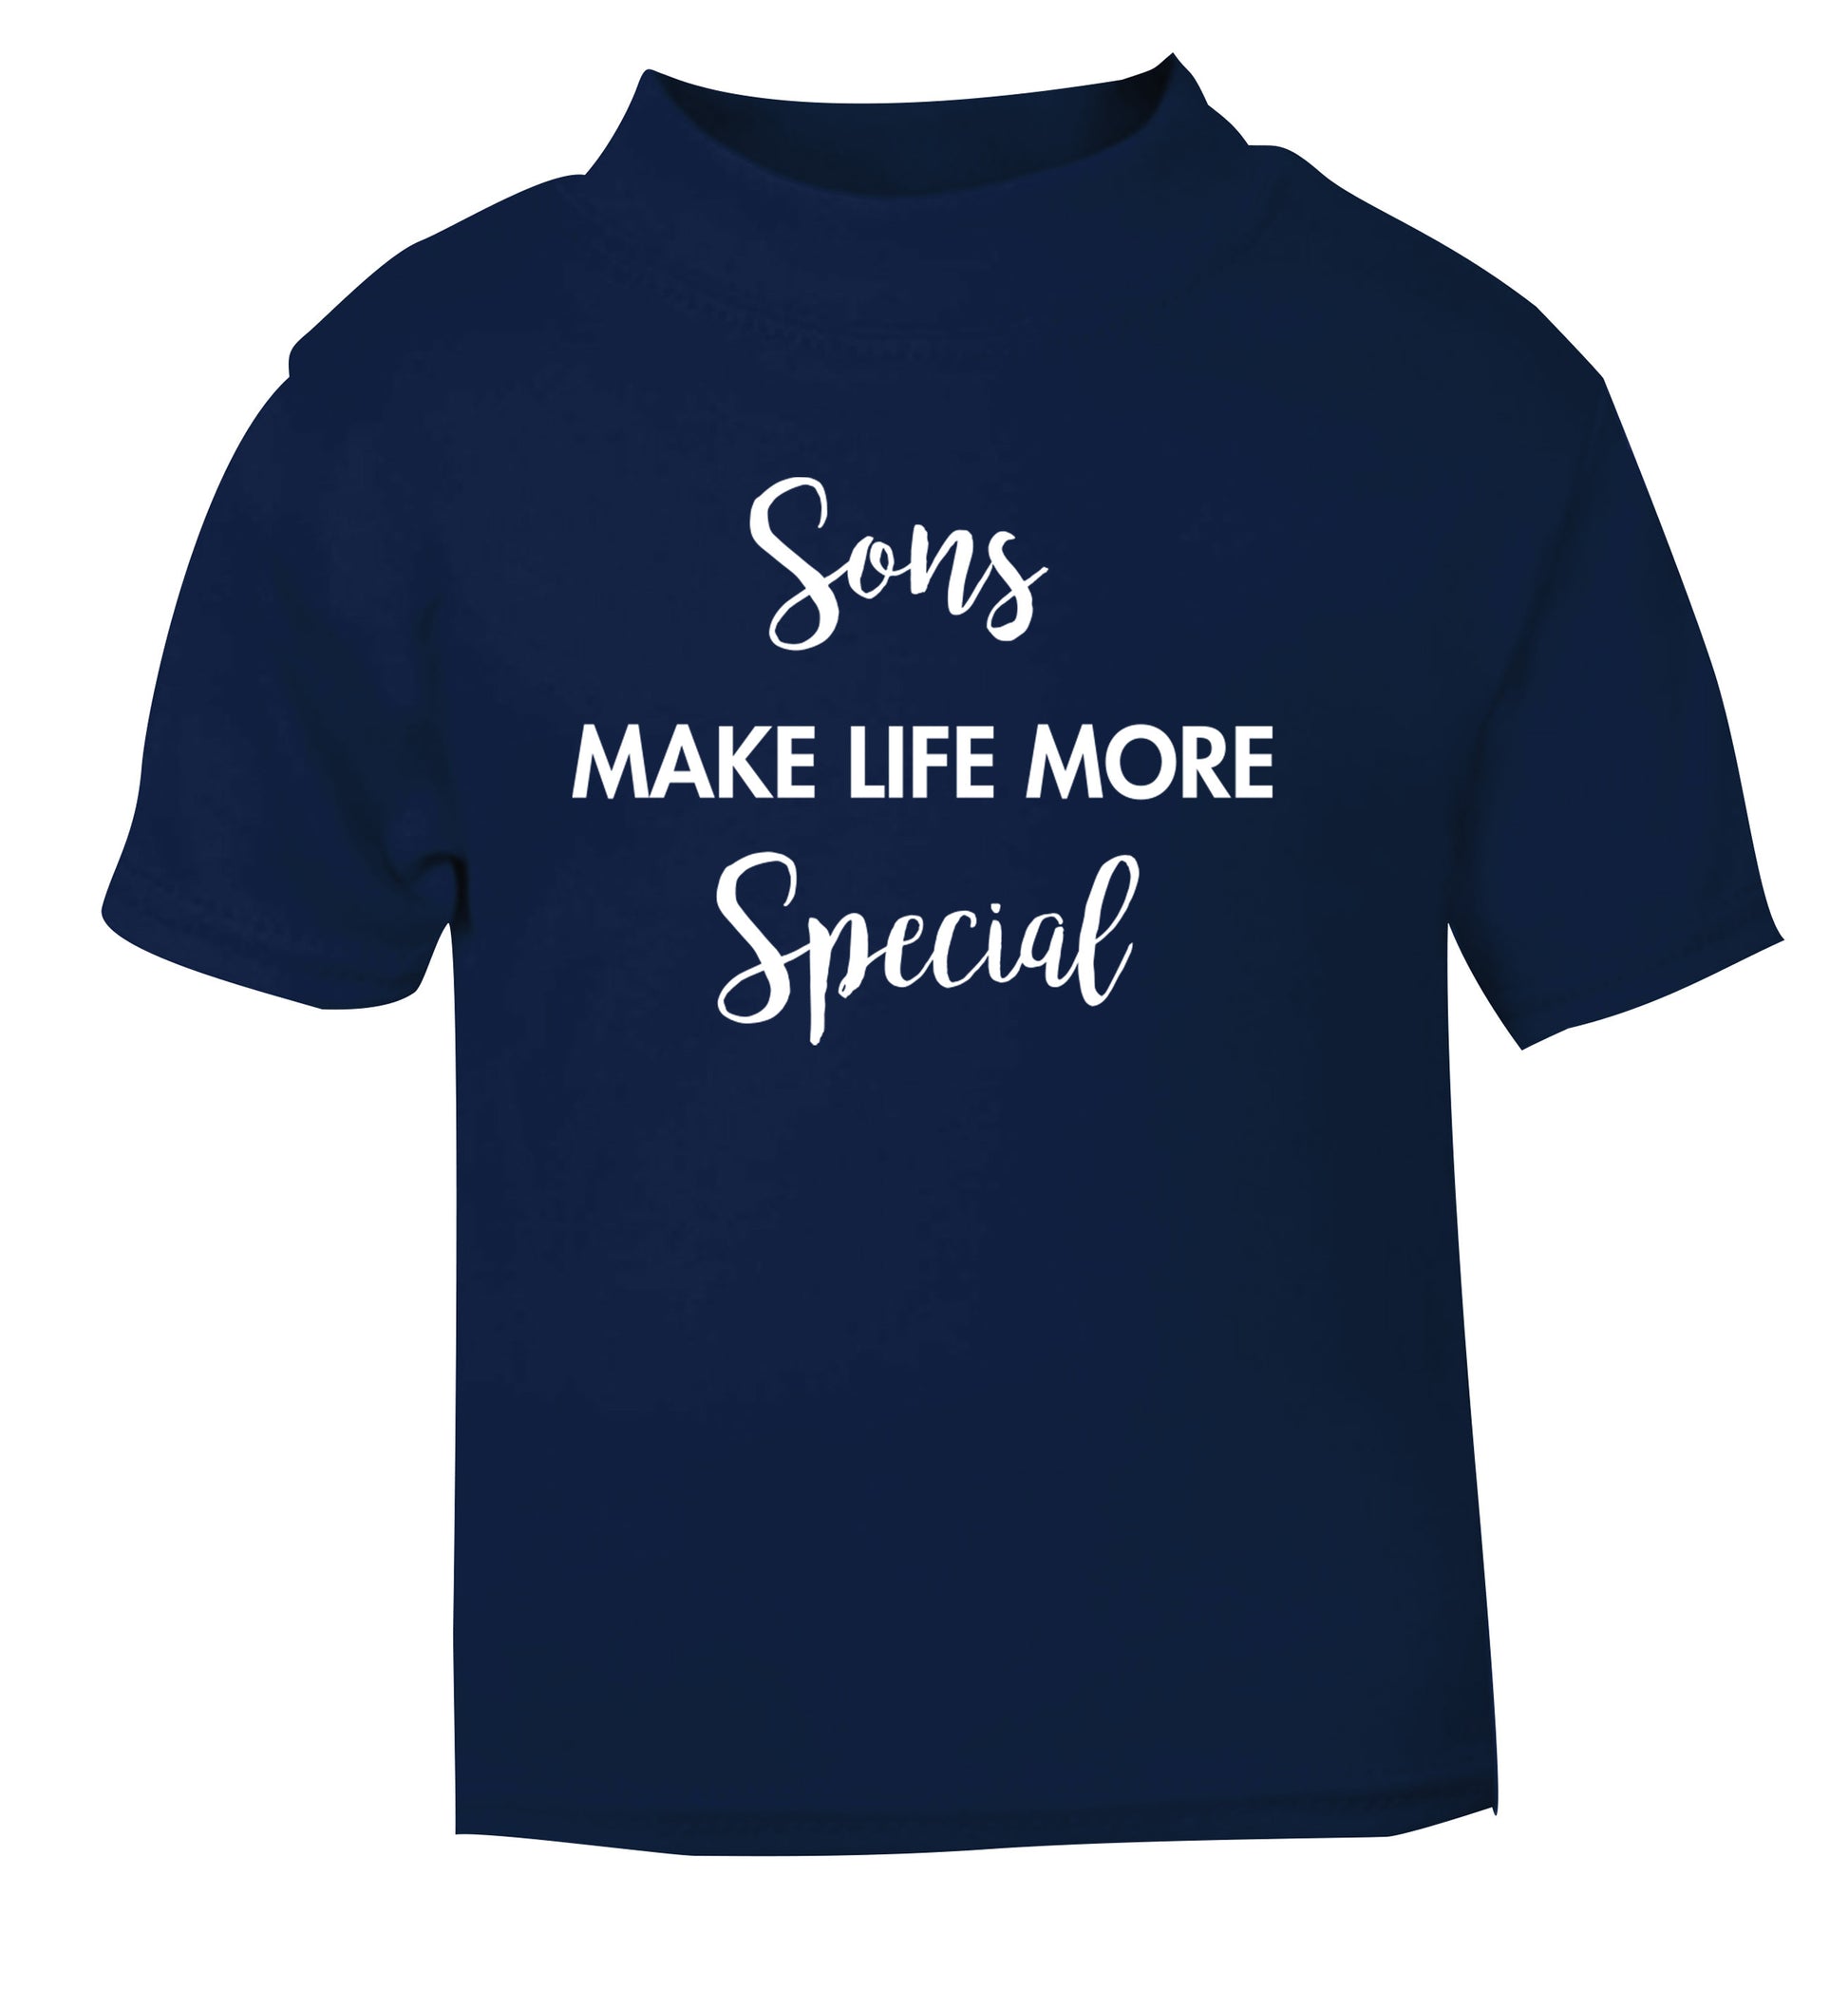 Daughters make life more special navy Baby Toddler Tshirt 2 Years